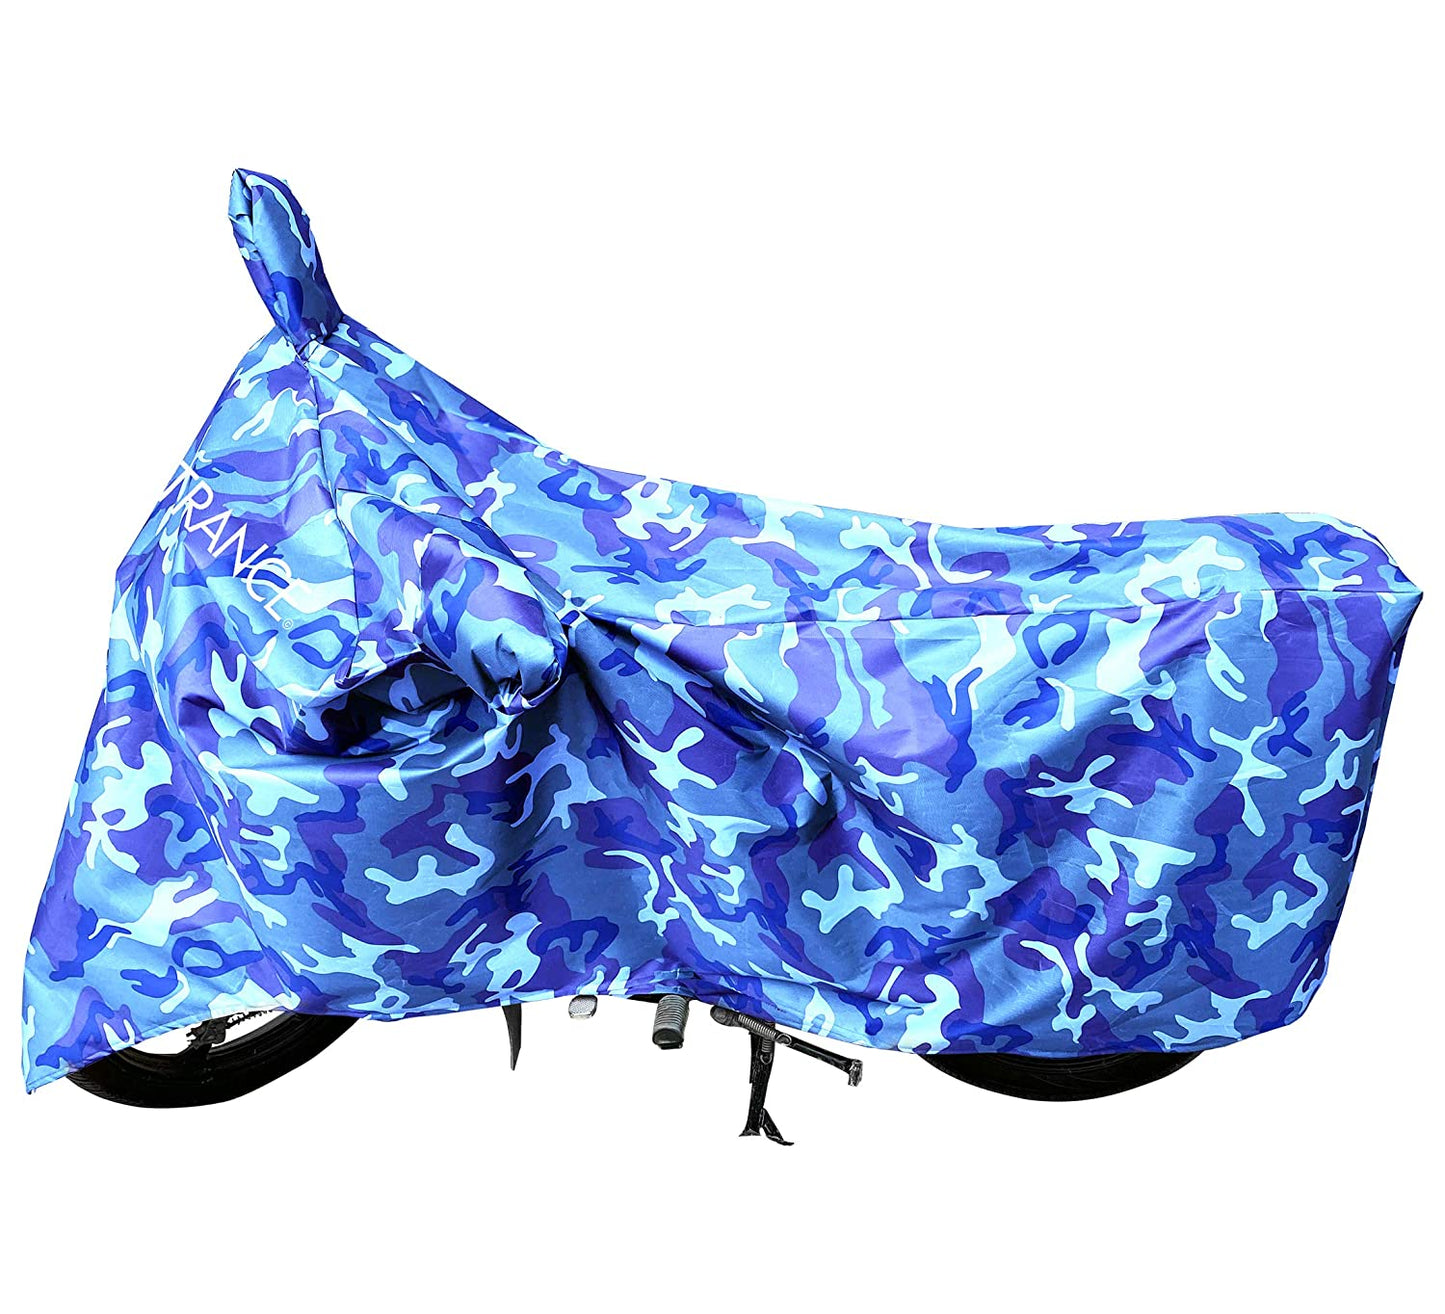 MotoTrance Jungle Bike Body Covers For TVS Fiero F2 - Interlock-Stitched Waterproof and Heat Resistant with Mirror Pockets